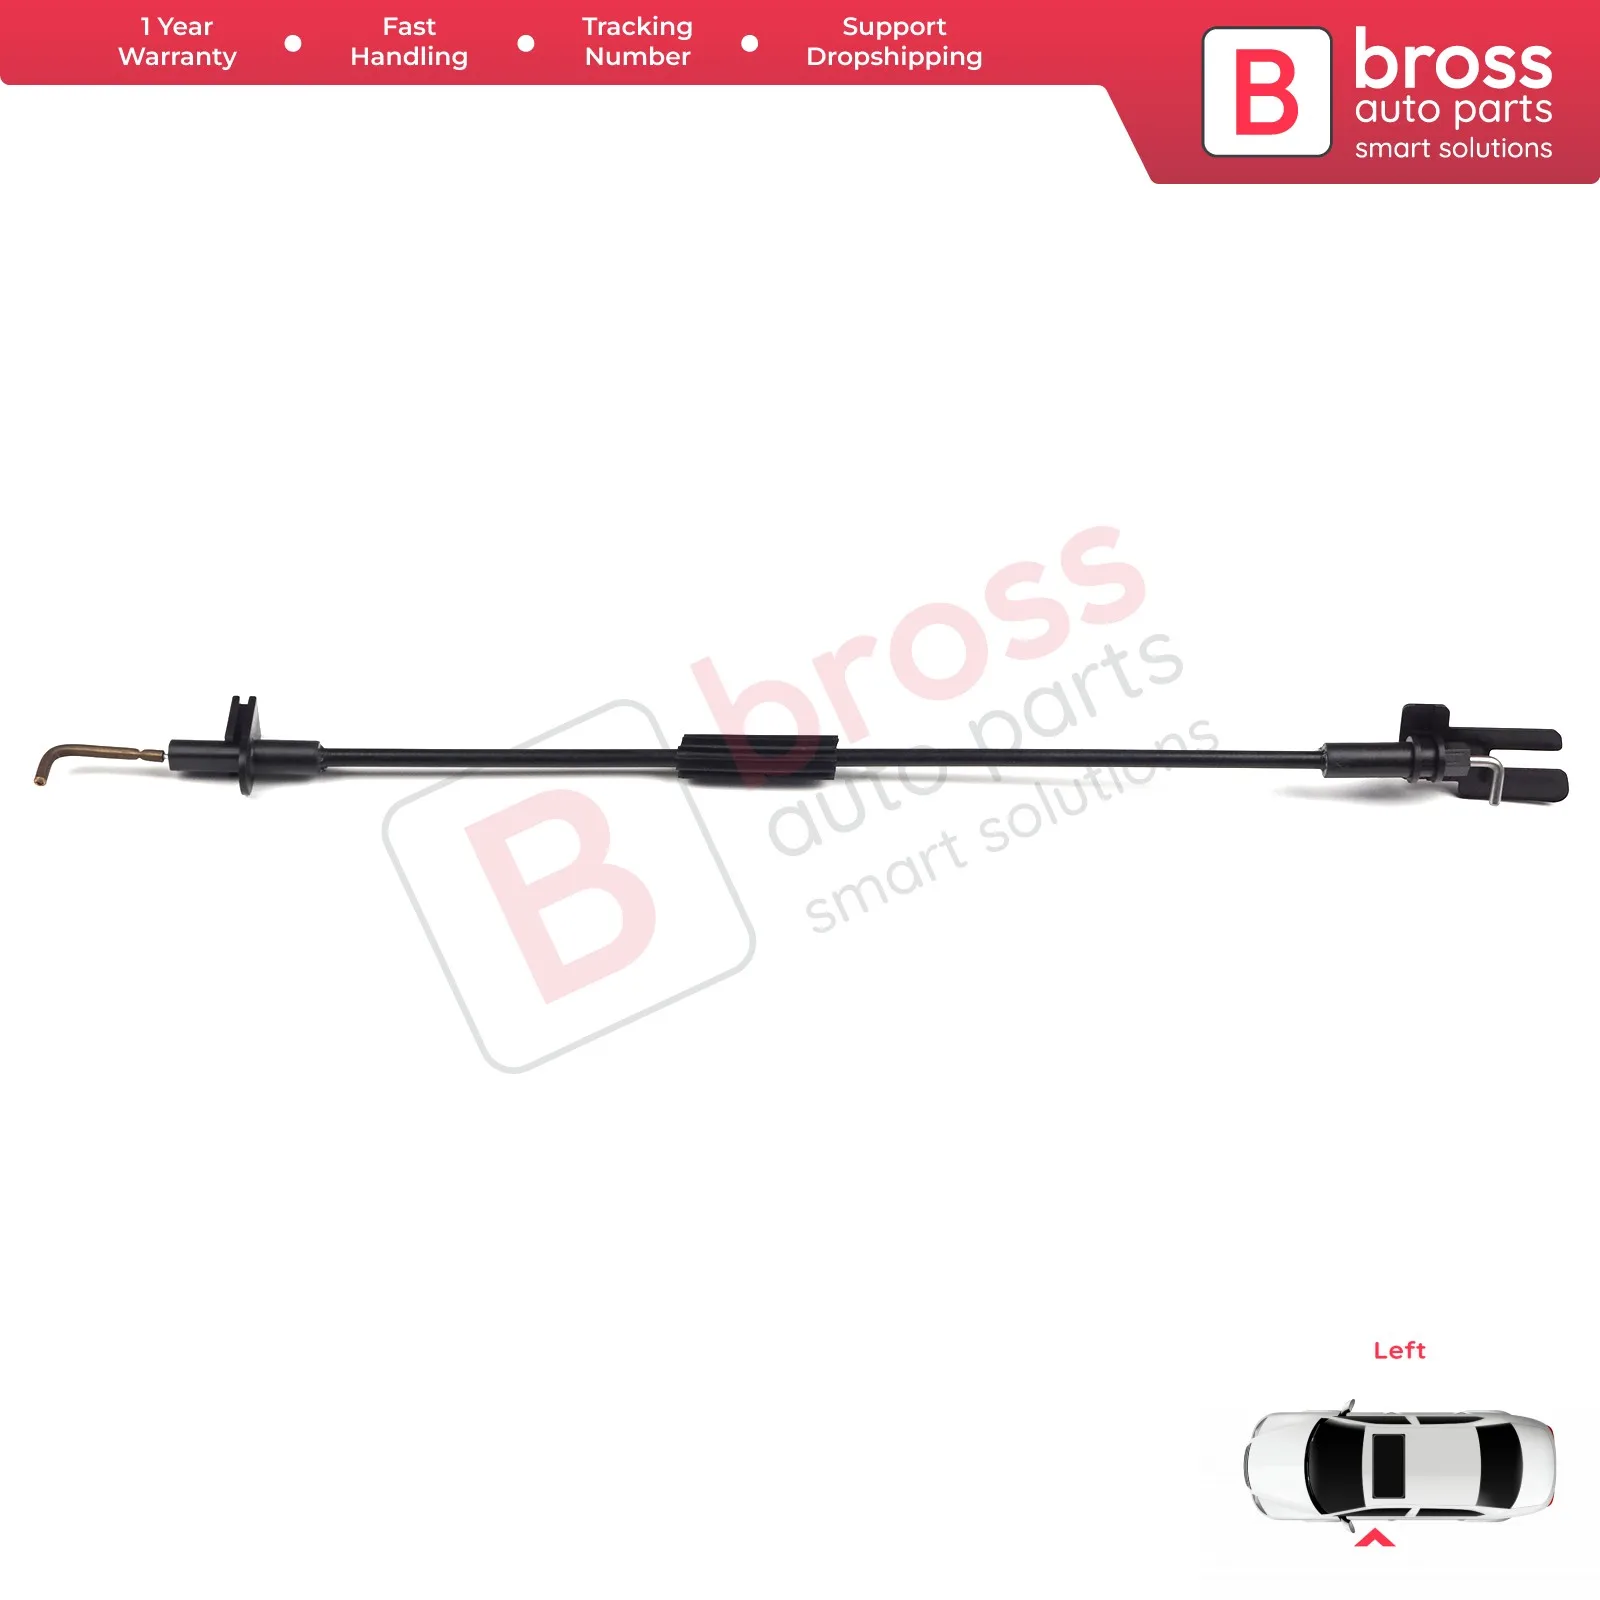 

Bross Auto Parts BDP633 Inner Door Lock Latch Bowden Cable Front Left Door 98822124 For Fiat Albea Palio Ship From turkey